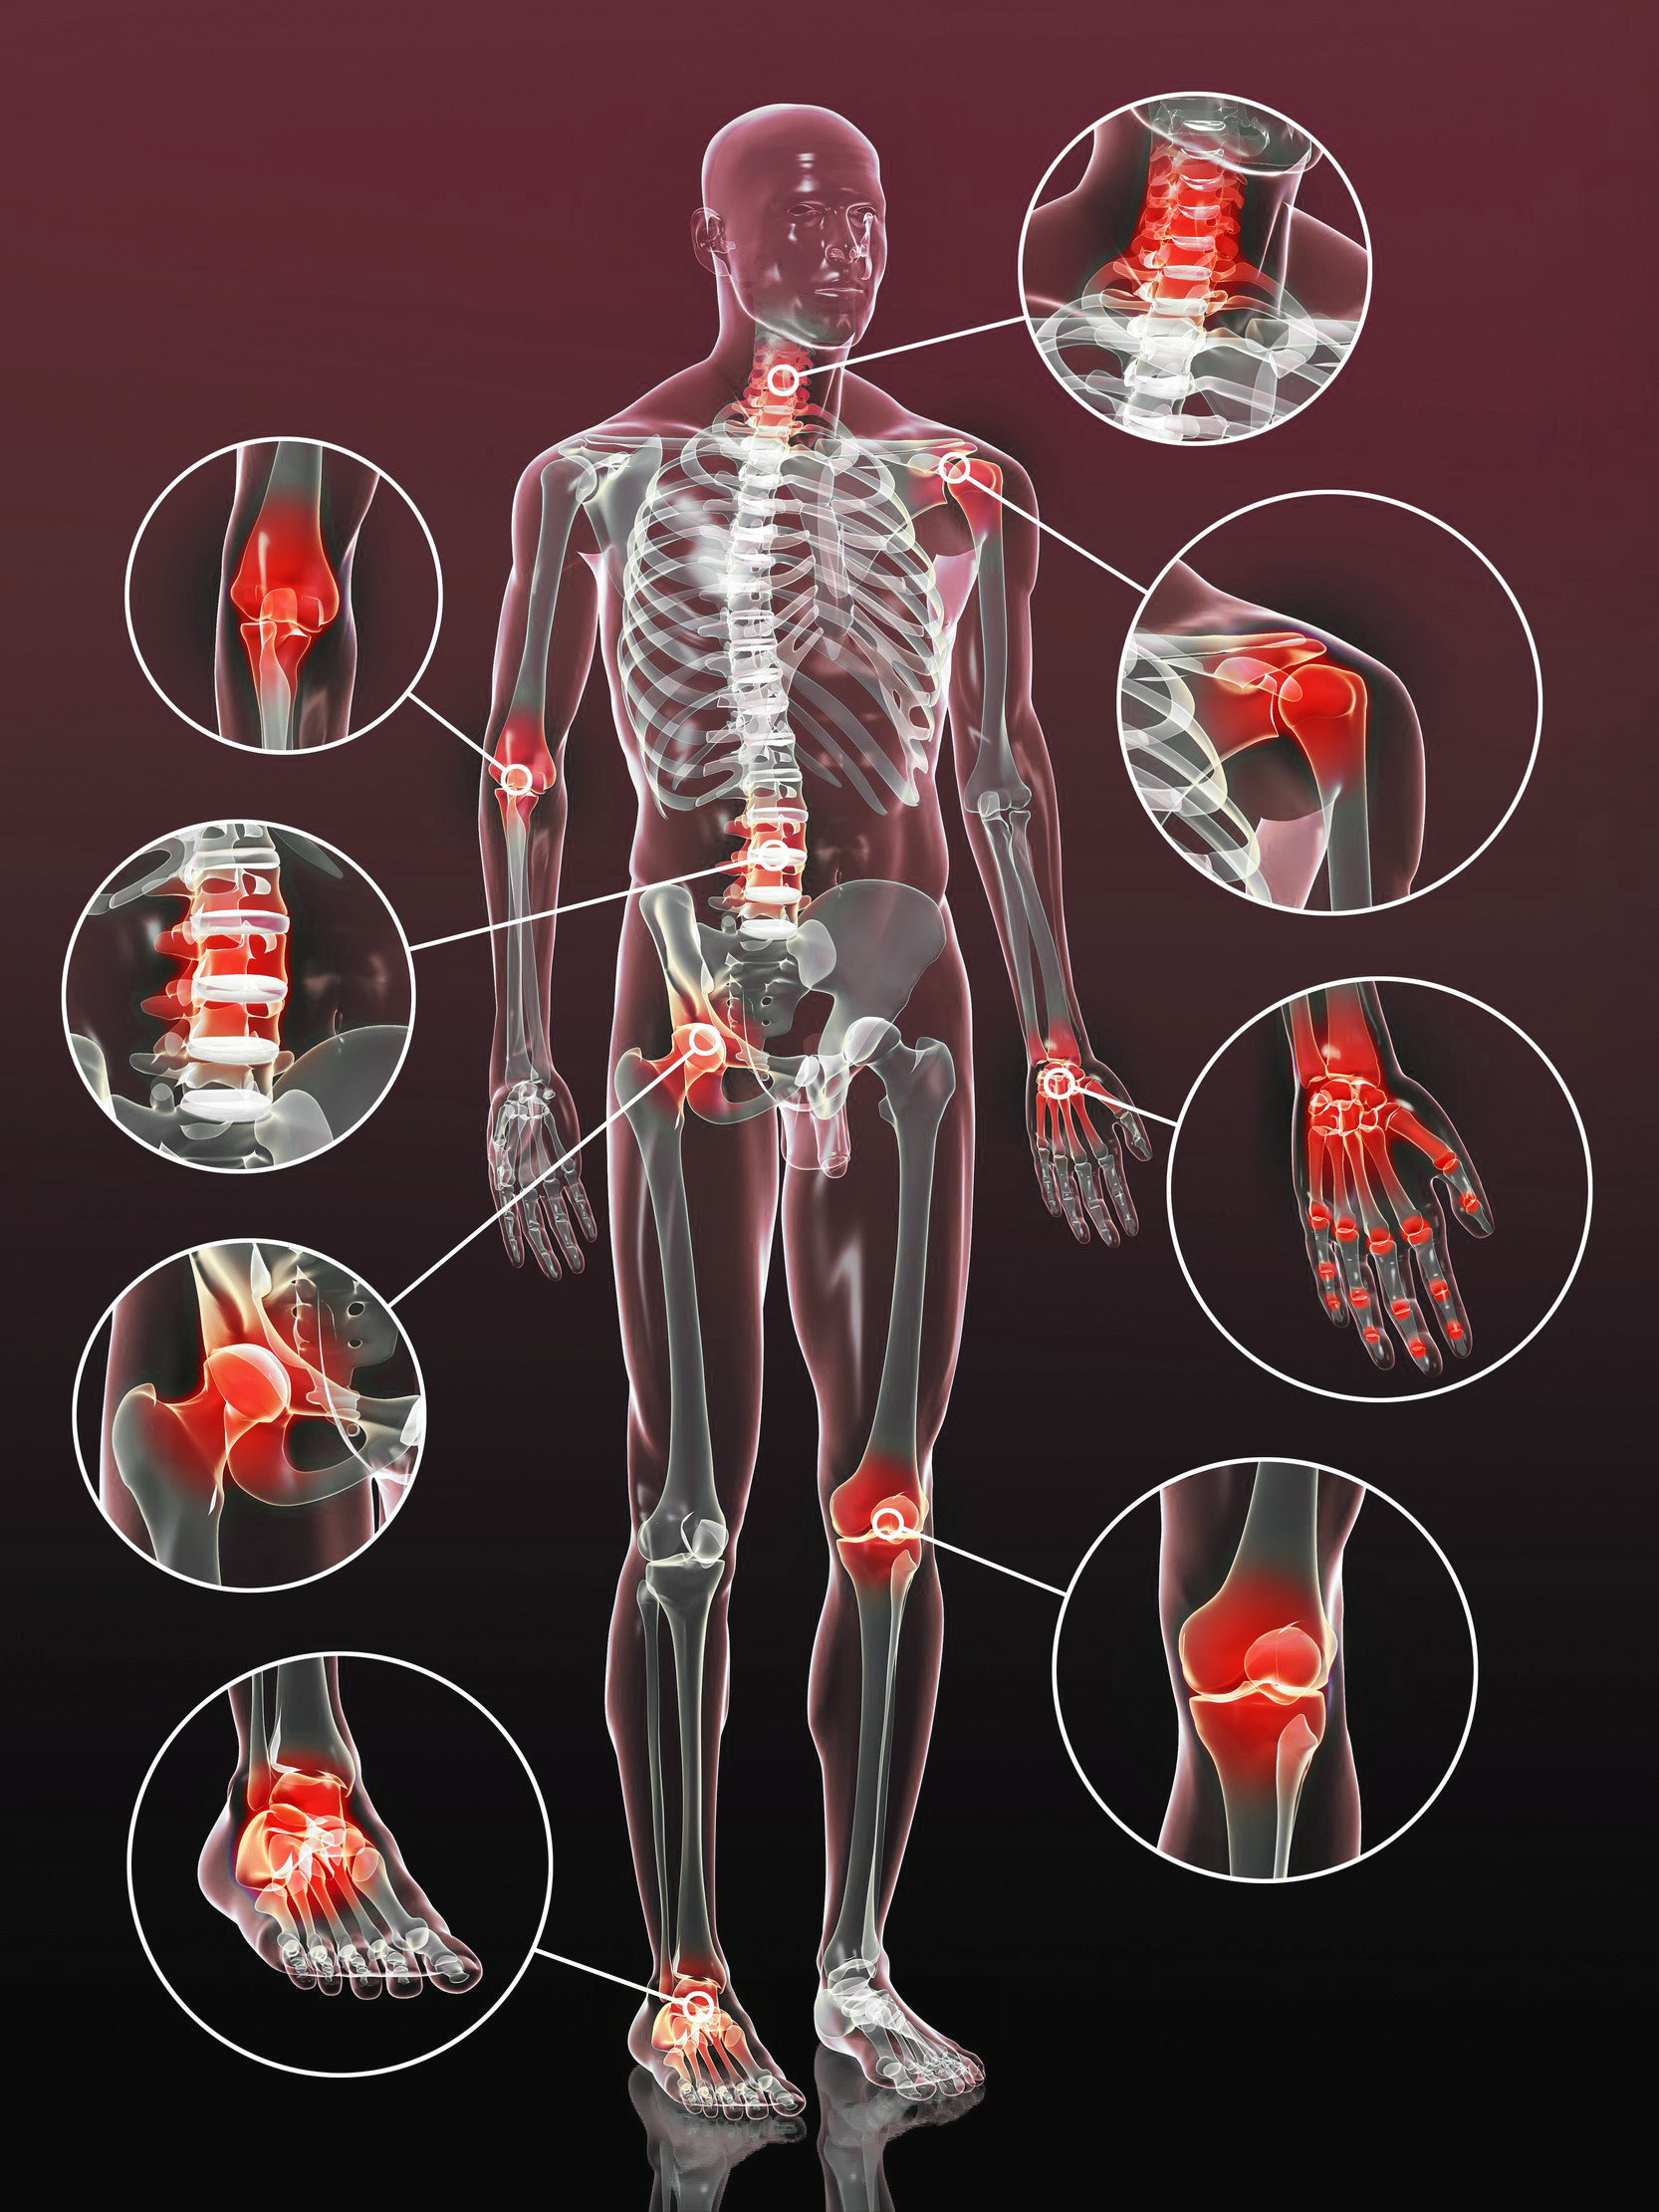 Inflamed joints throughout the body